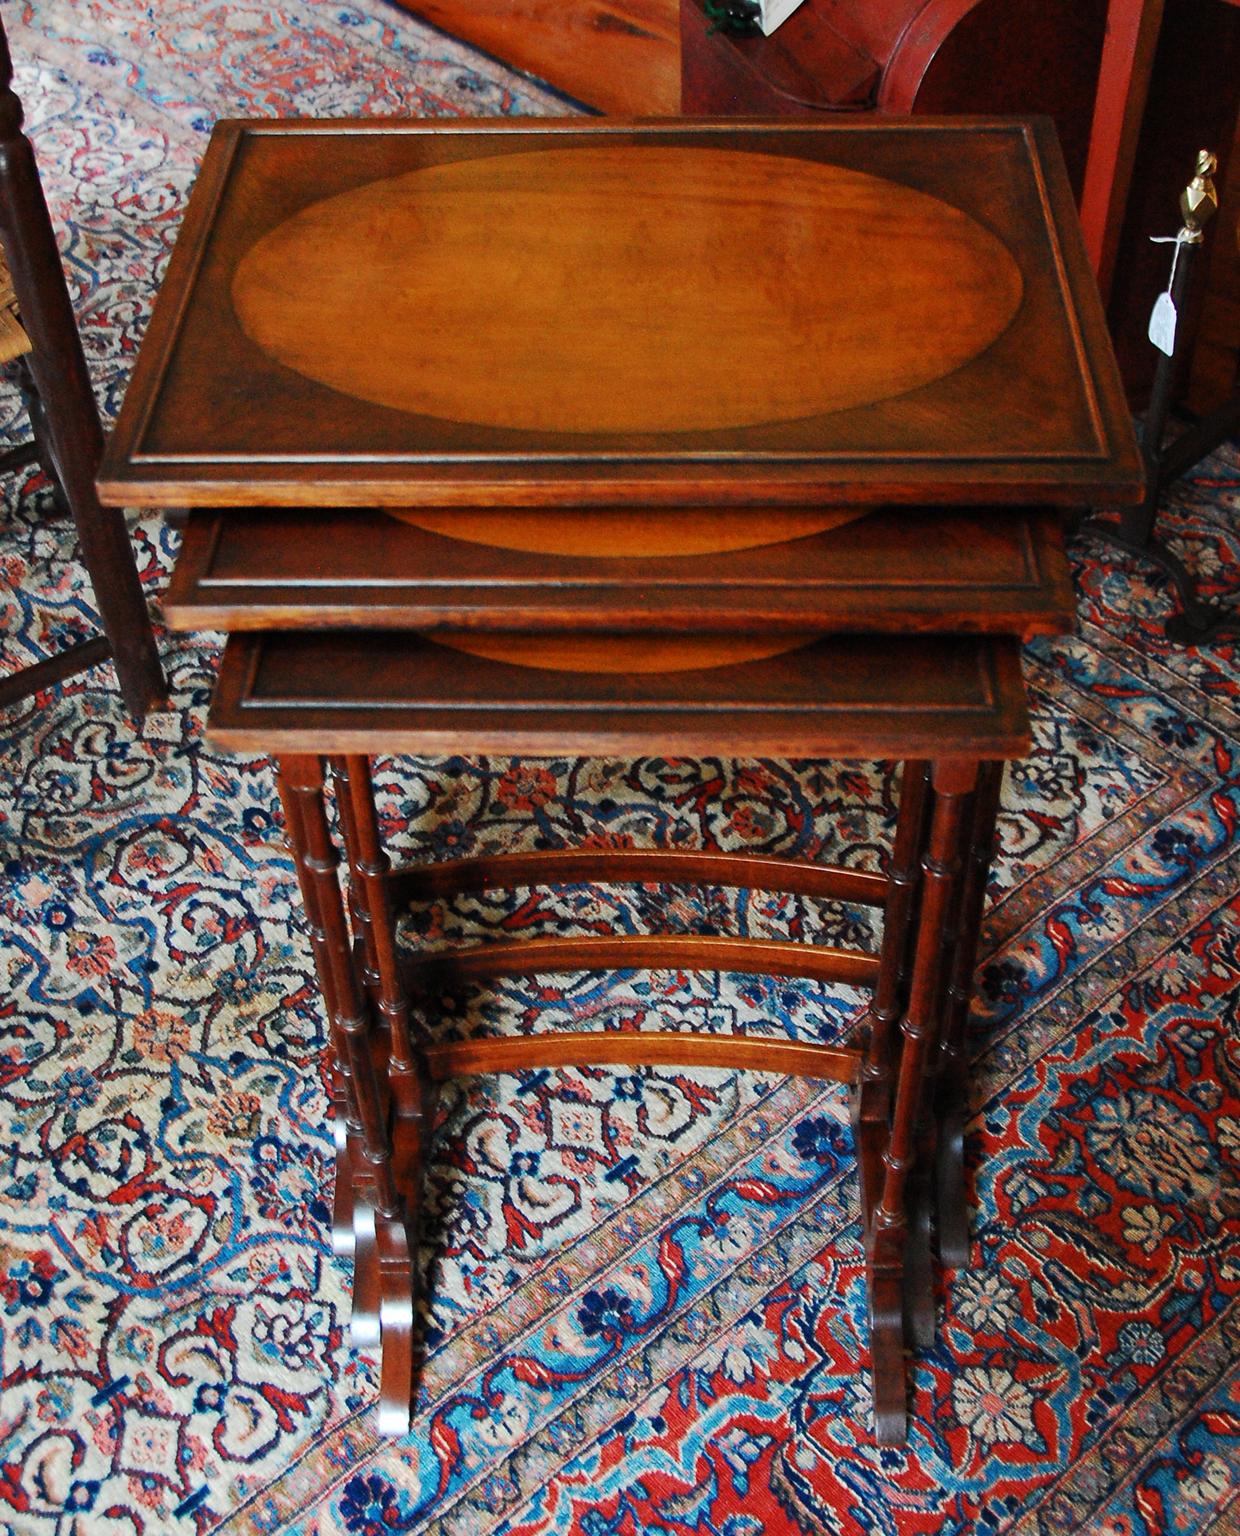 English Edwardian mahogany set of three nesting tables with oval inlays in satinwood, low gallery, delicately turned legs with curved stretchers. These three tables stack together nicely and can be pulled out so one, two or three tables are usable.